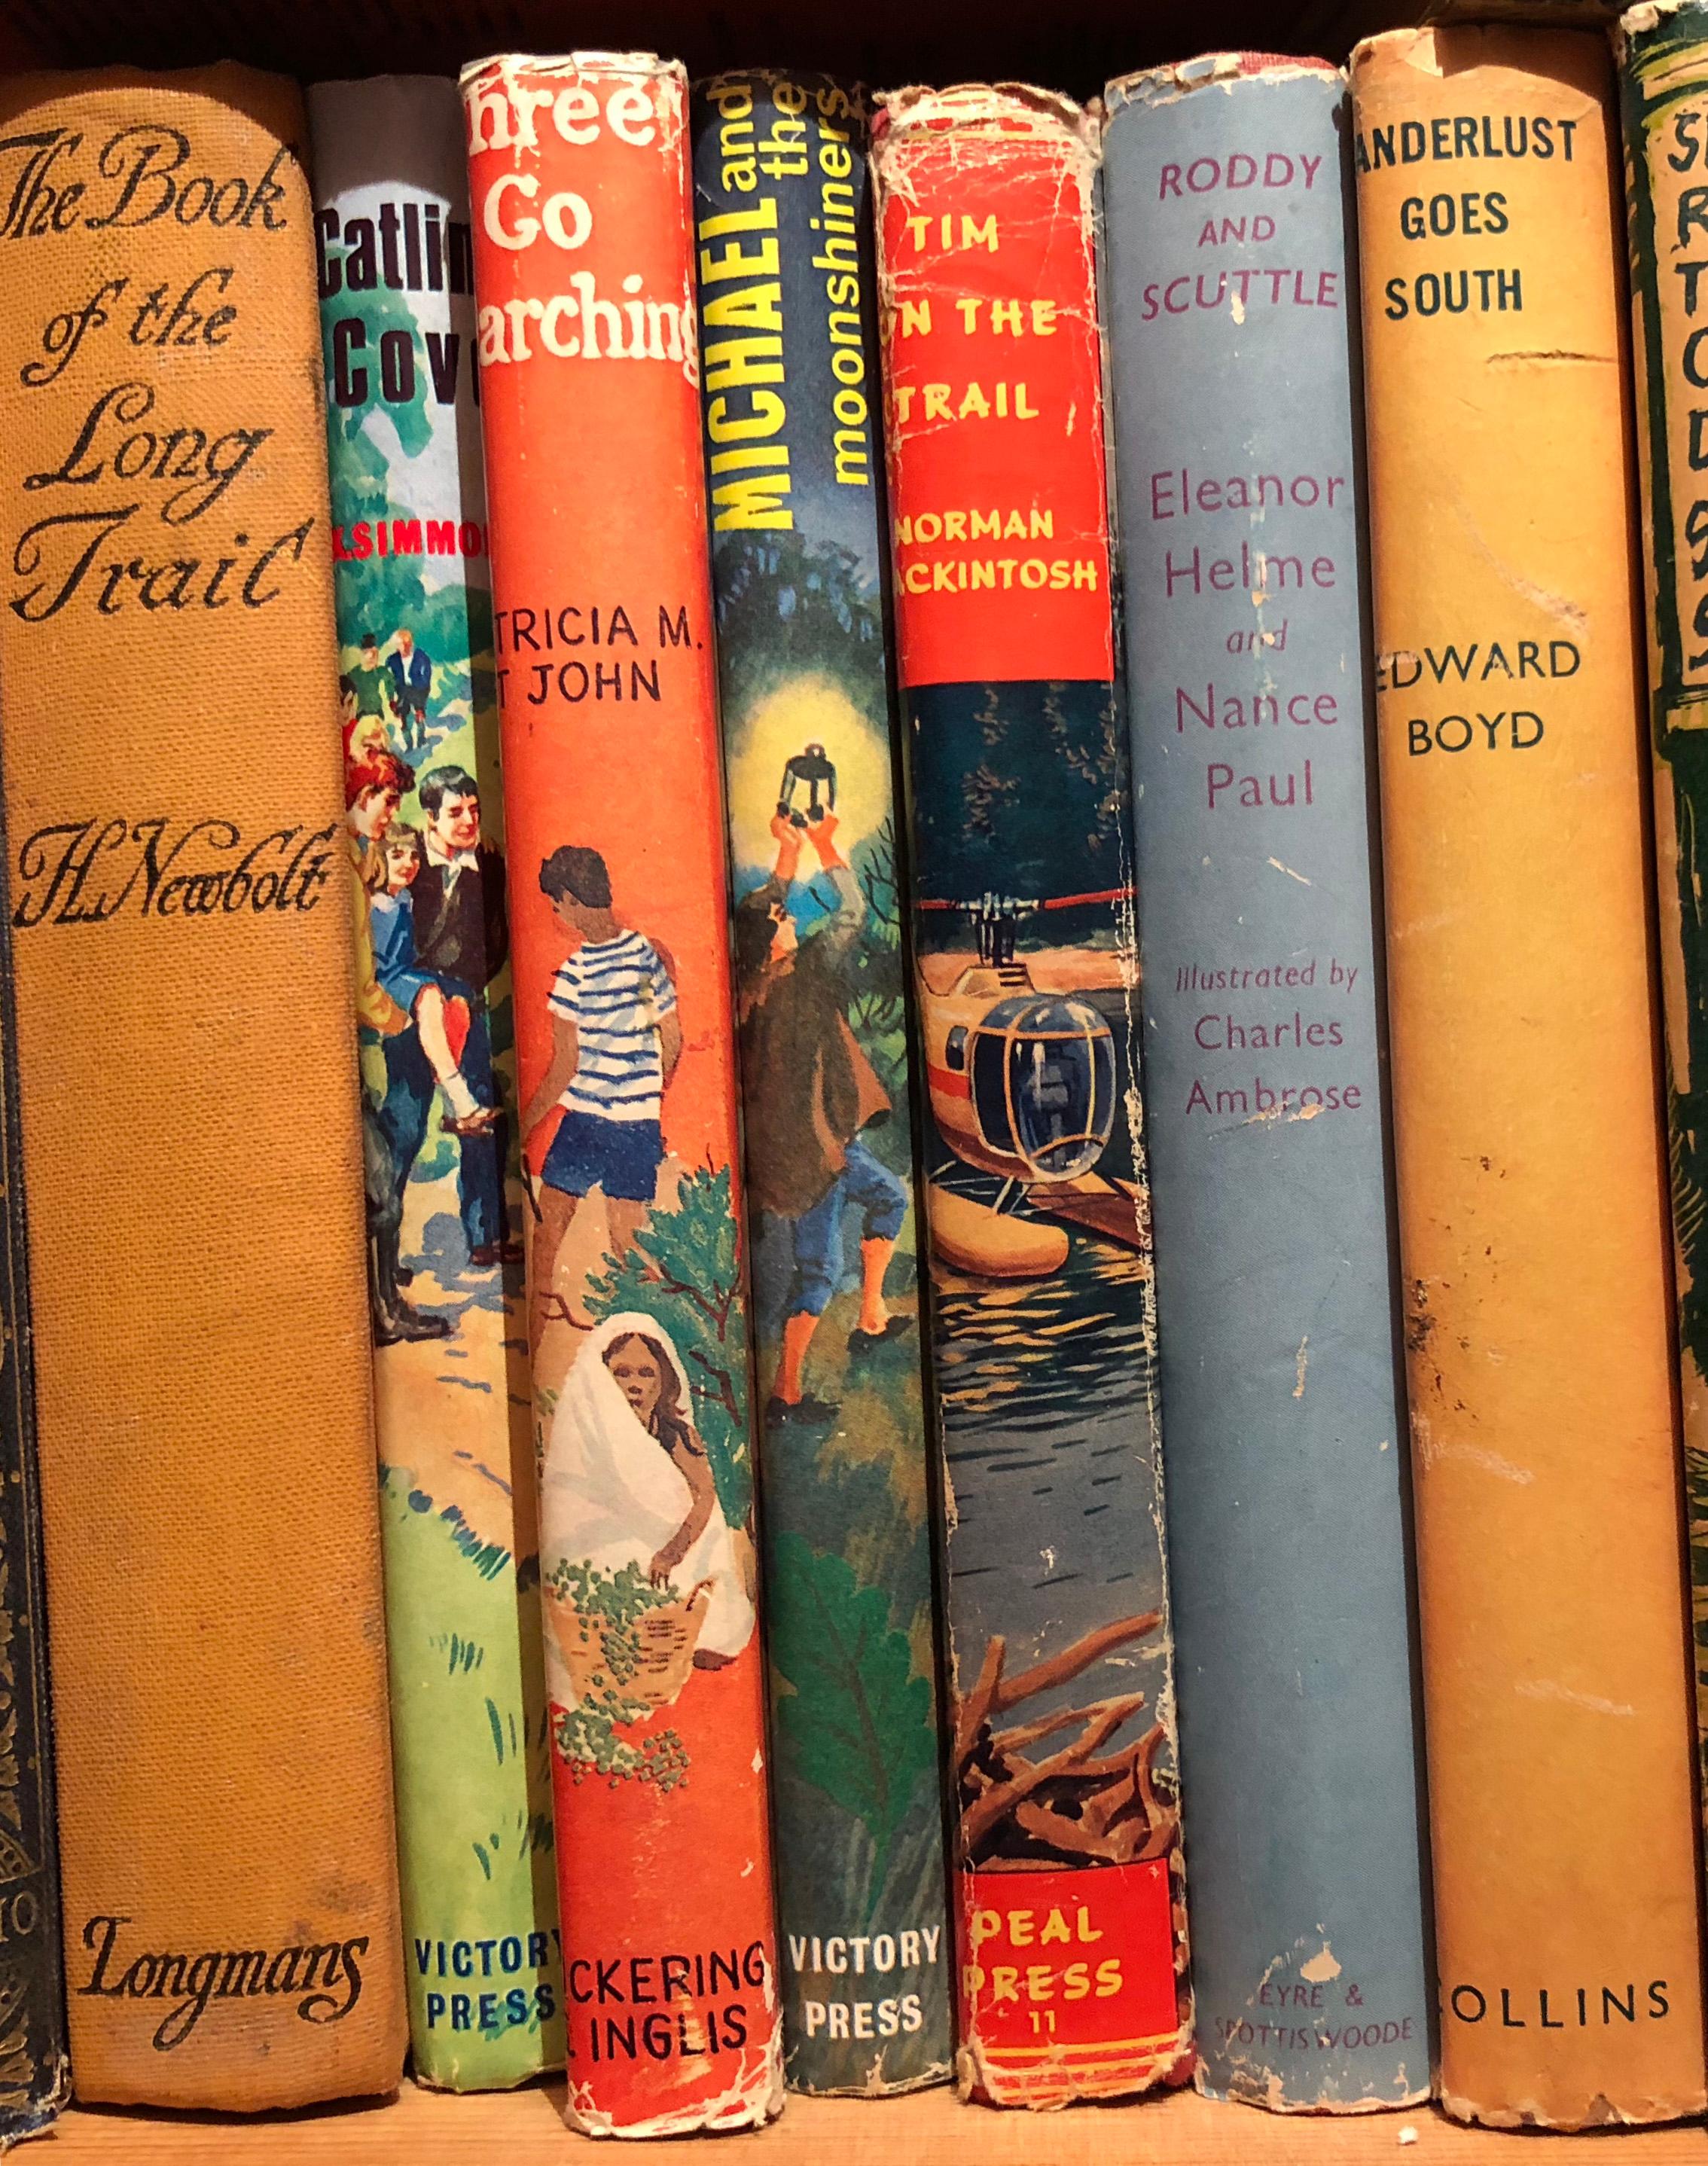 'Wanderlust Goes South', a selection of vintage fiction book spines. Photographed by Richard Heeps in a secondhand bookshop in the traditional North Norfolk seaside town, Sheringham.

This artwork is a limited edition of 25, gloss photographic